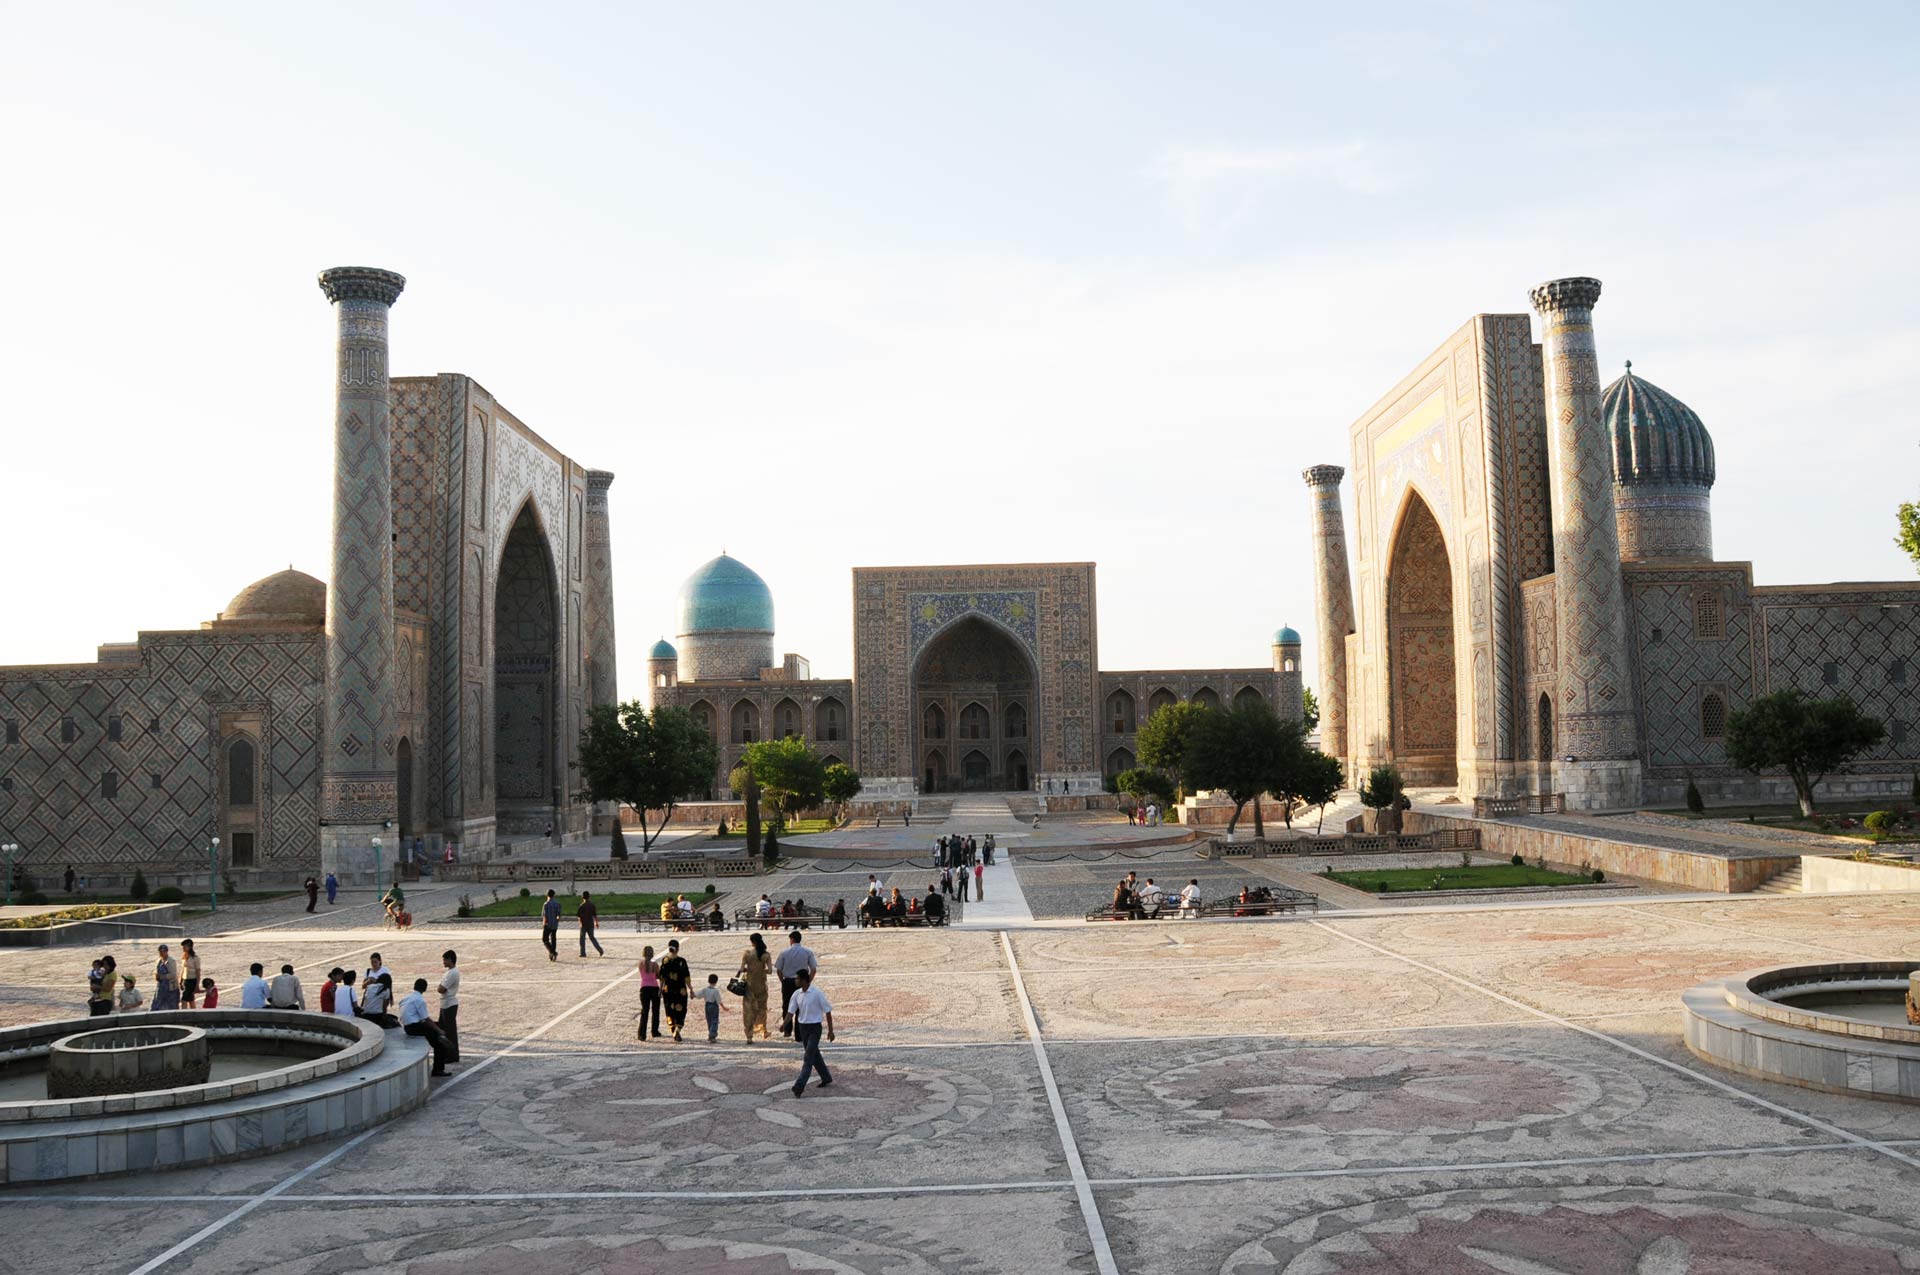 The Registan, the heart of the ancient city of Samarkand